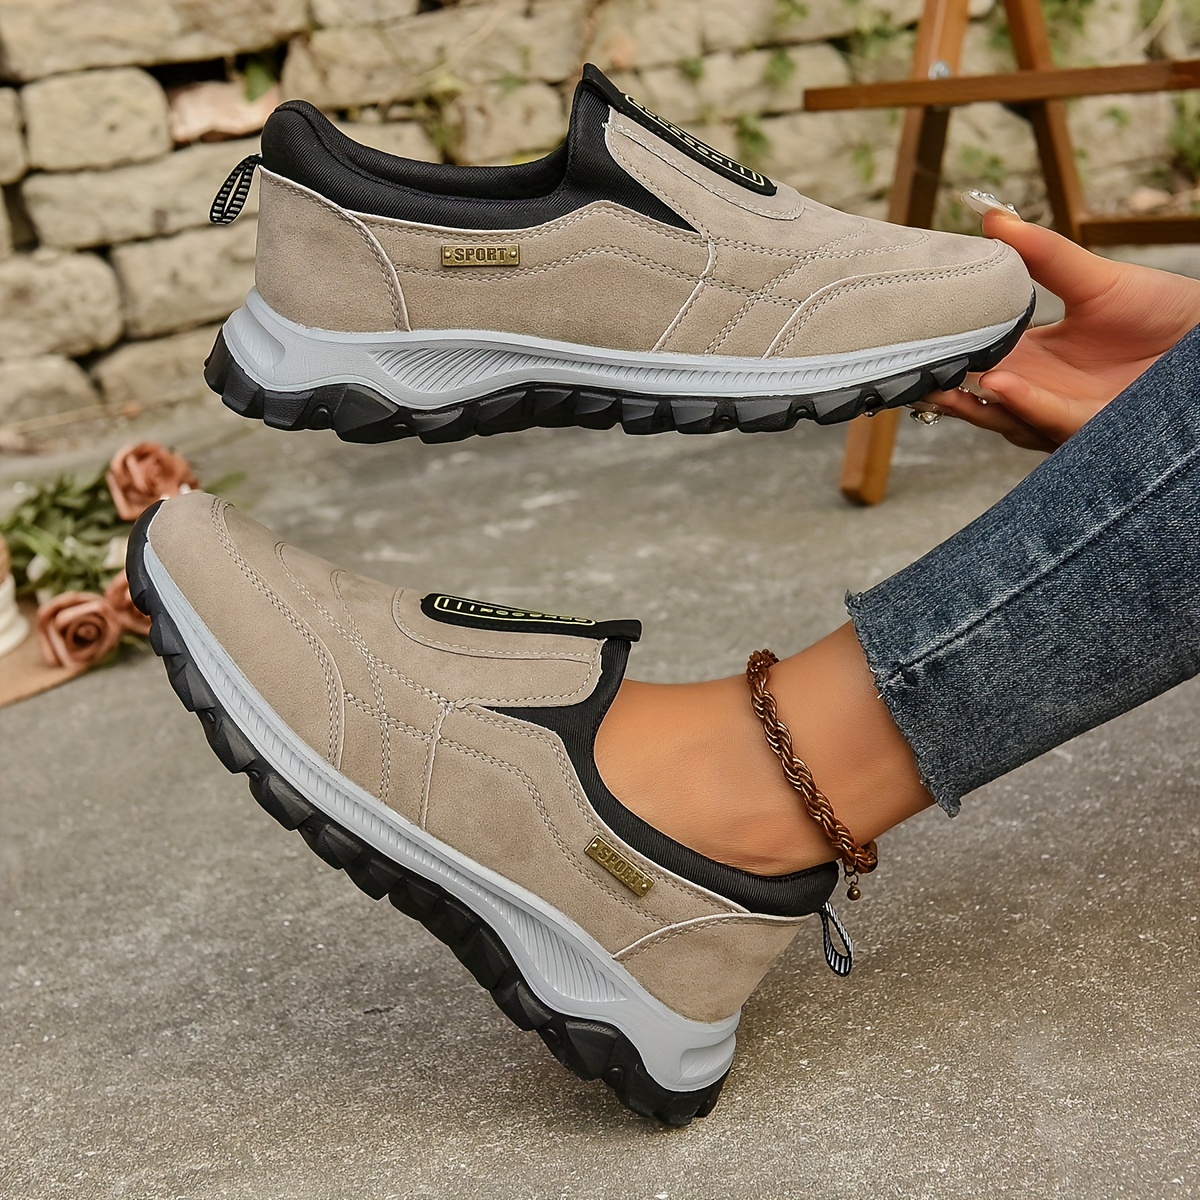 womens letter pattern fashion slip on walking shoes non slip lightweight outdoor athletic sneakers details 0